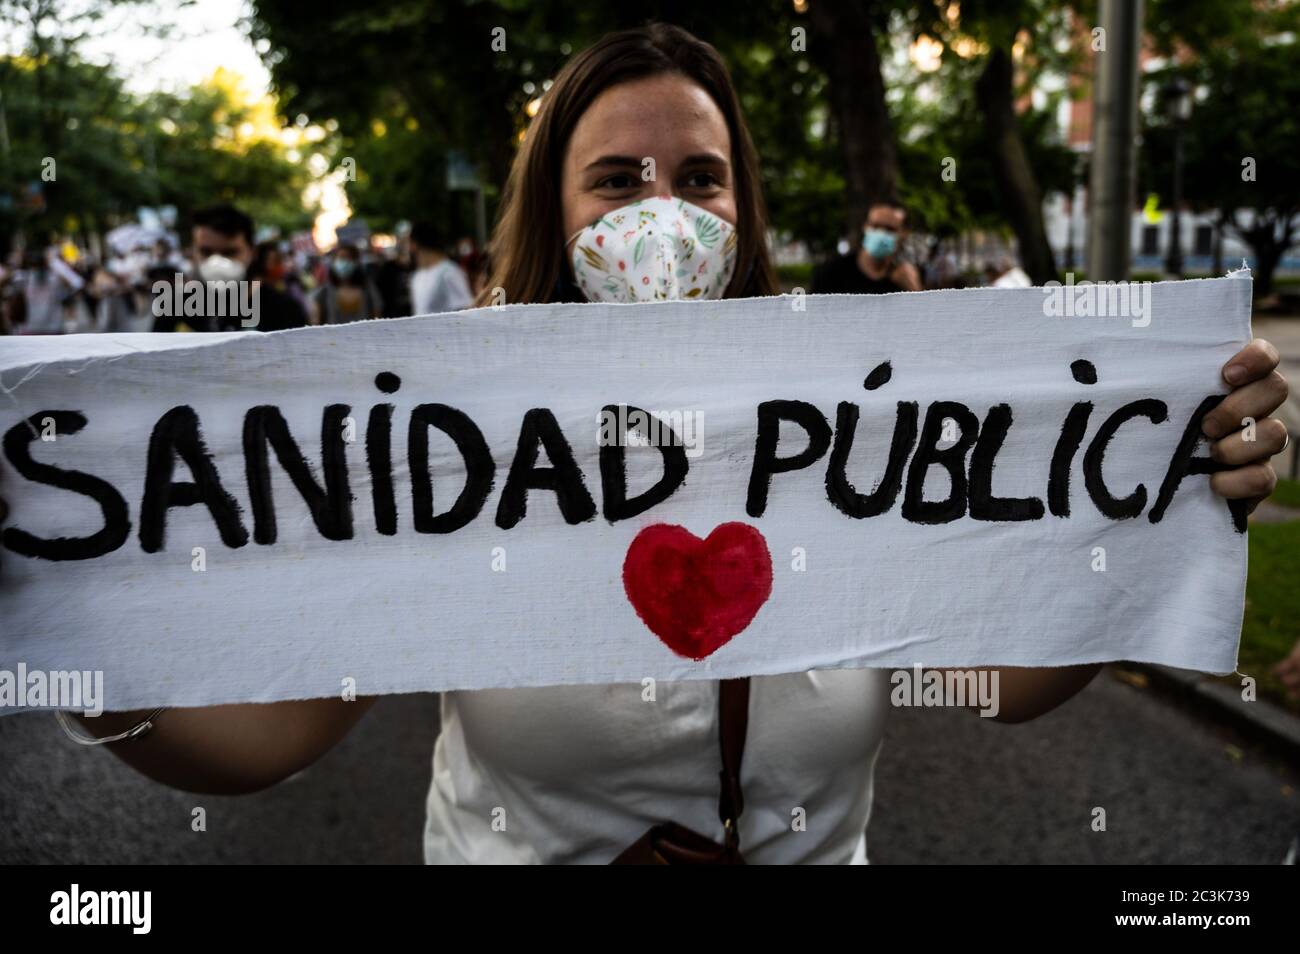 Madrid, Spain. 20th June, 2020. Madrid, Spain. June 20, 2020. A woman with a banner reading 'Public Healthcare' during a demonstration in support of the public healthcare system and protesting against privatization. Healthcare workers are carrying out protests during the coronavirus crisis against the precariousness of their work. Credit: Marcos del Mazo/Alamy Live News Stock Photo